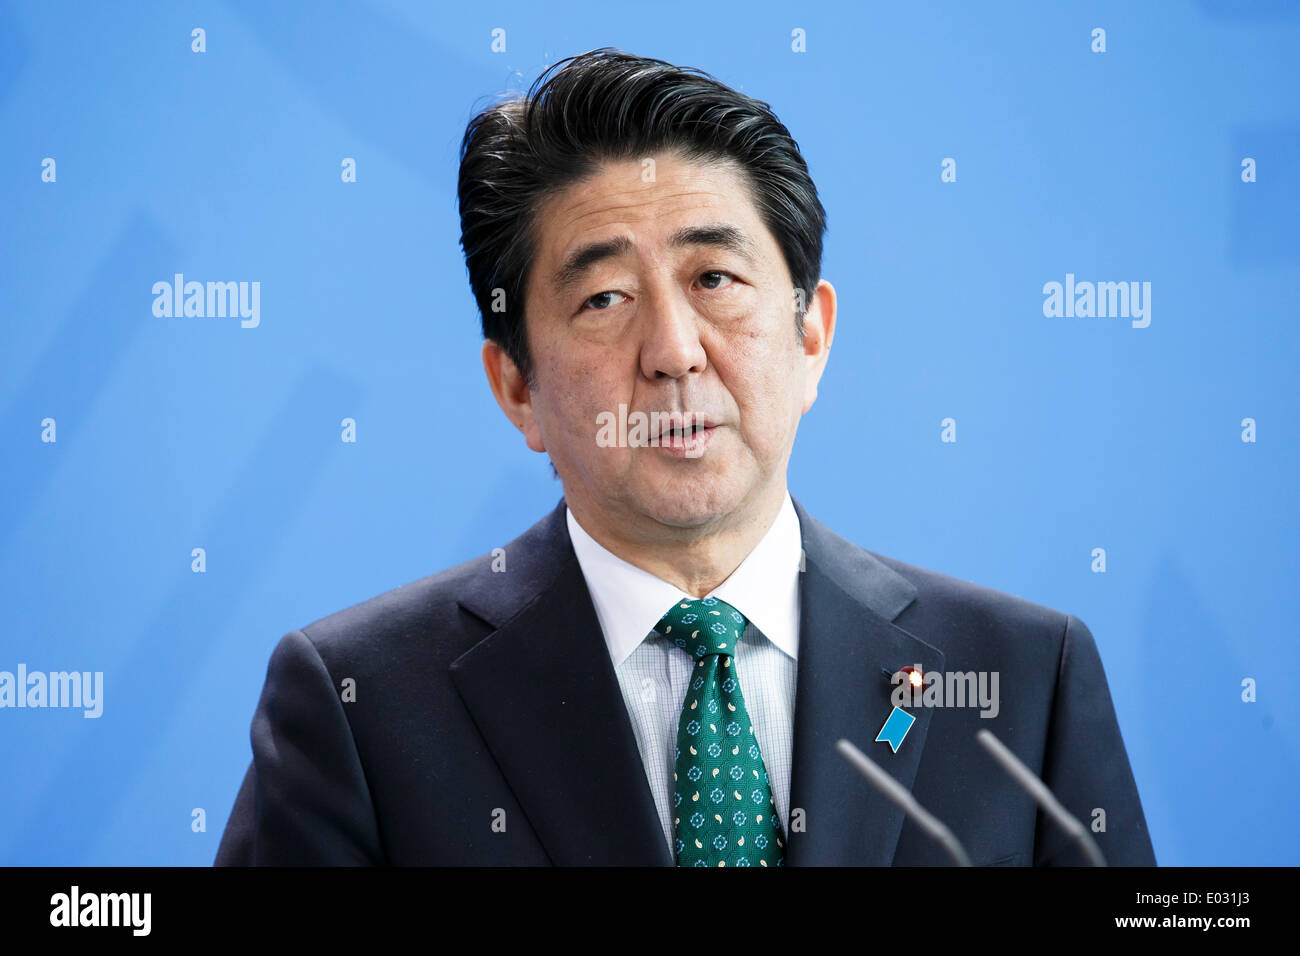 Berlin, Germany. April 30th, 2014. Shinzo Abe, Prime Minister of Japan, and German Chancellor Angela Merkel gives a joint press conference at Chancellery in Berlin. / Picture: Shinzo Abe, Prime Minister of Japan Stock Photo